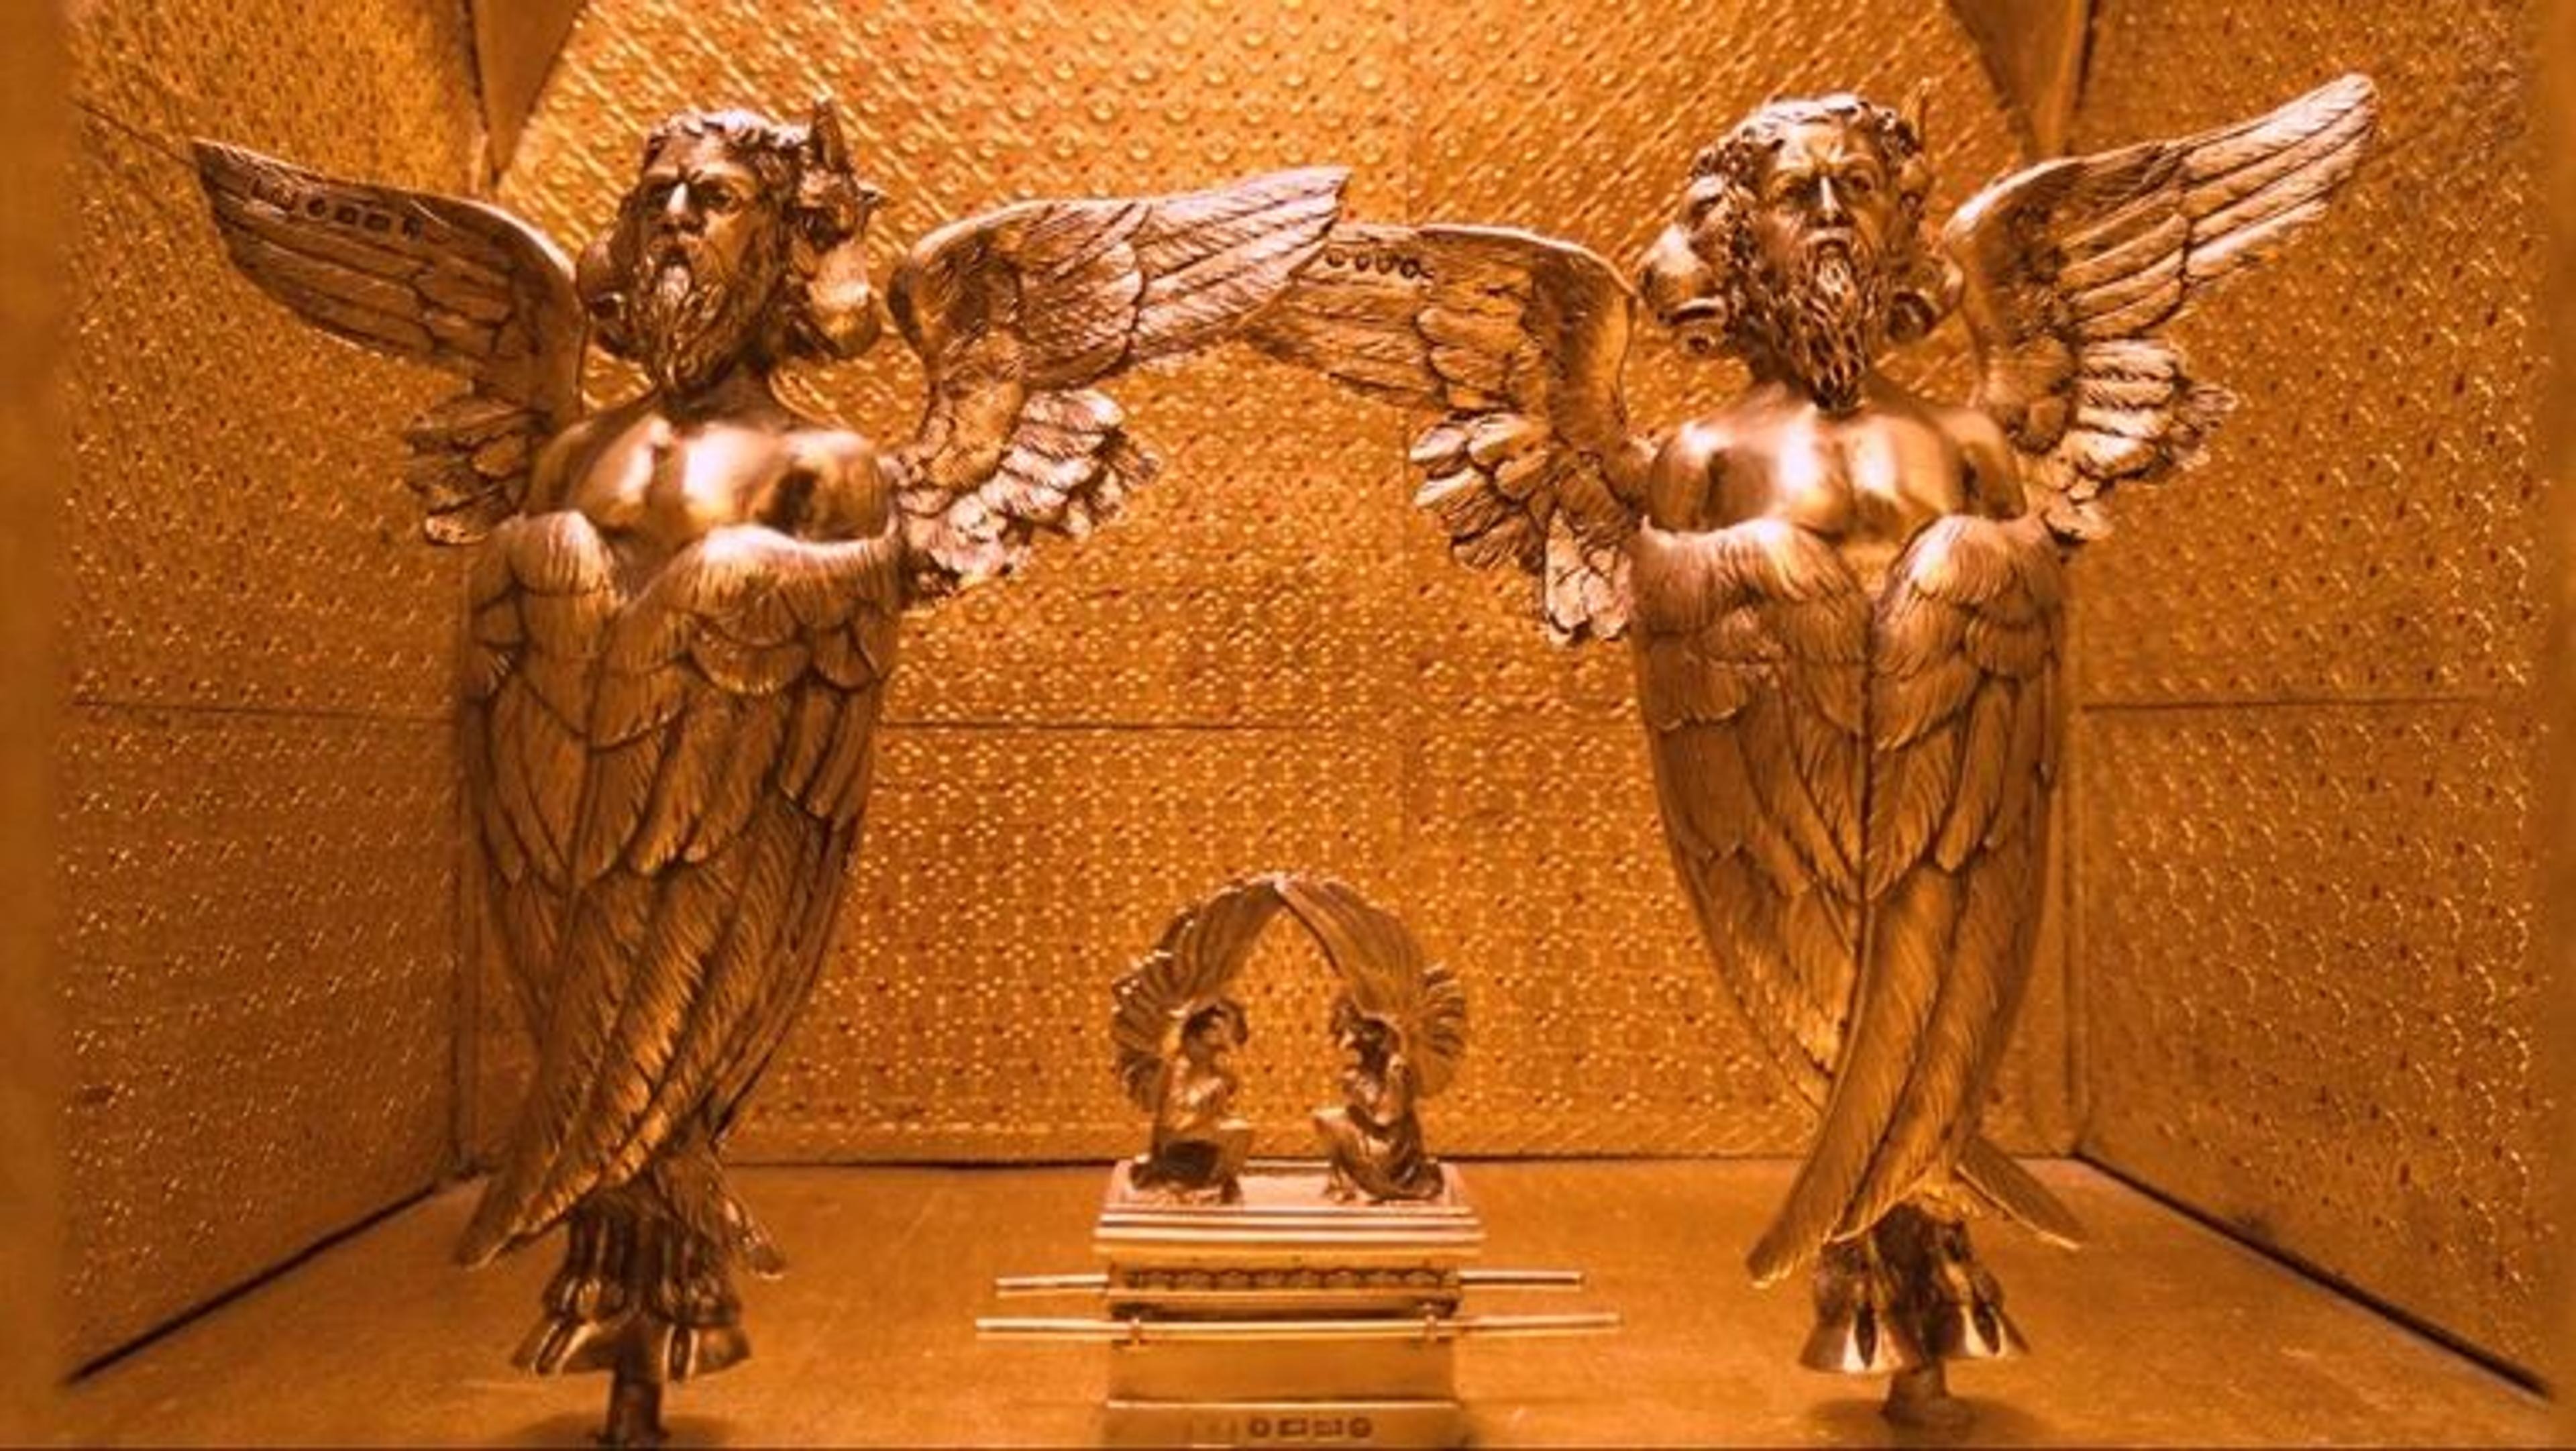 A golden model room with two gold statues of ancient angels and an ornate cabinet between them.